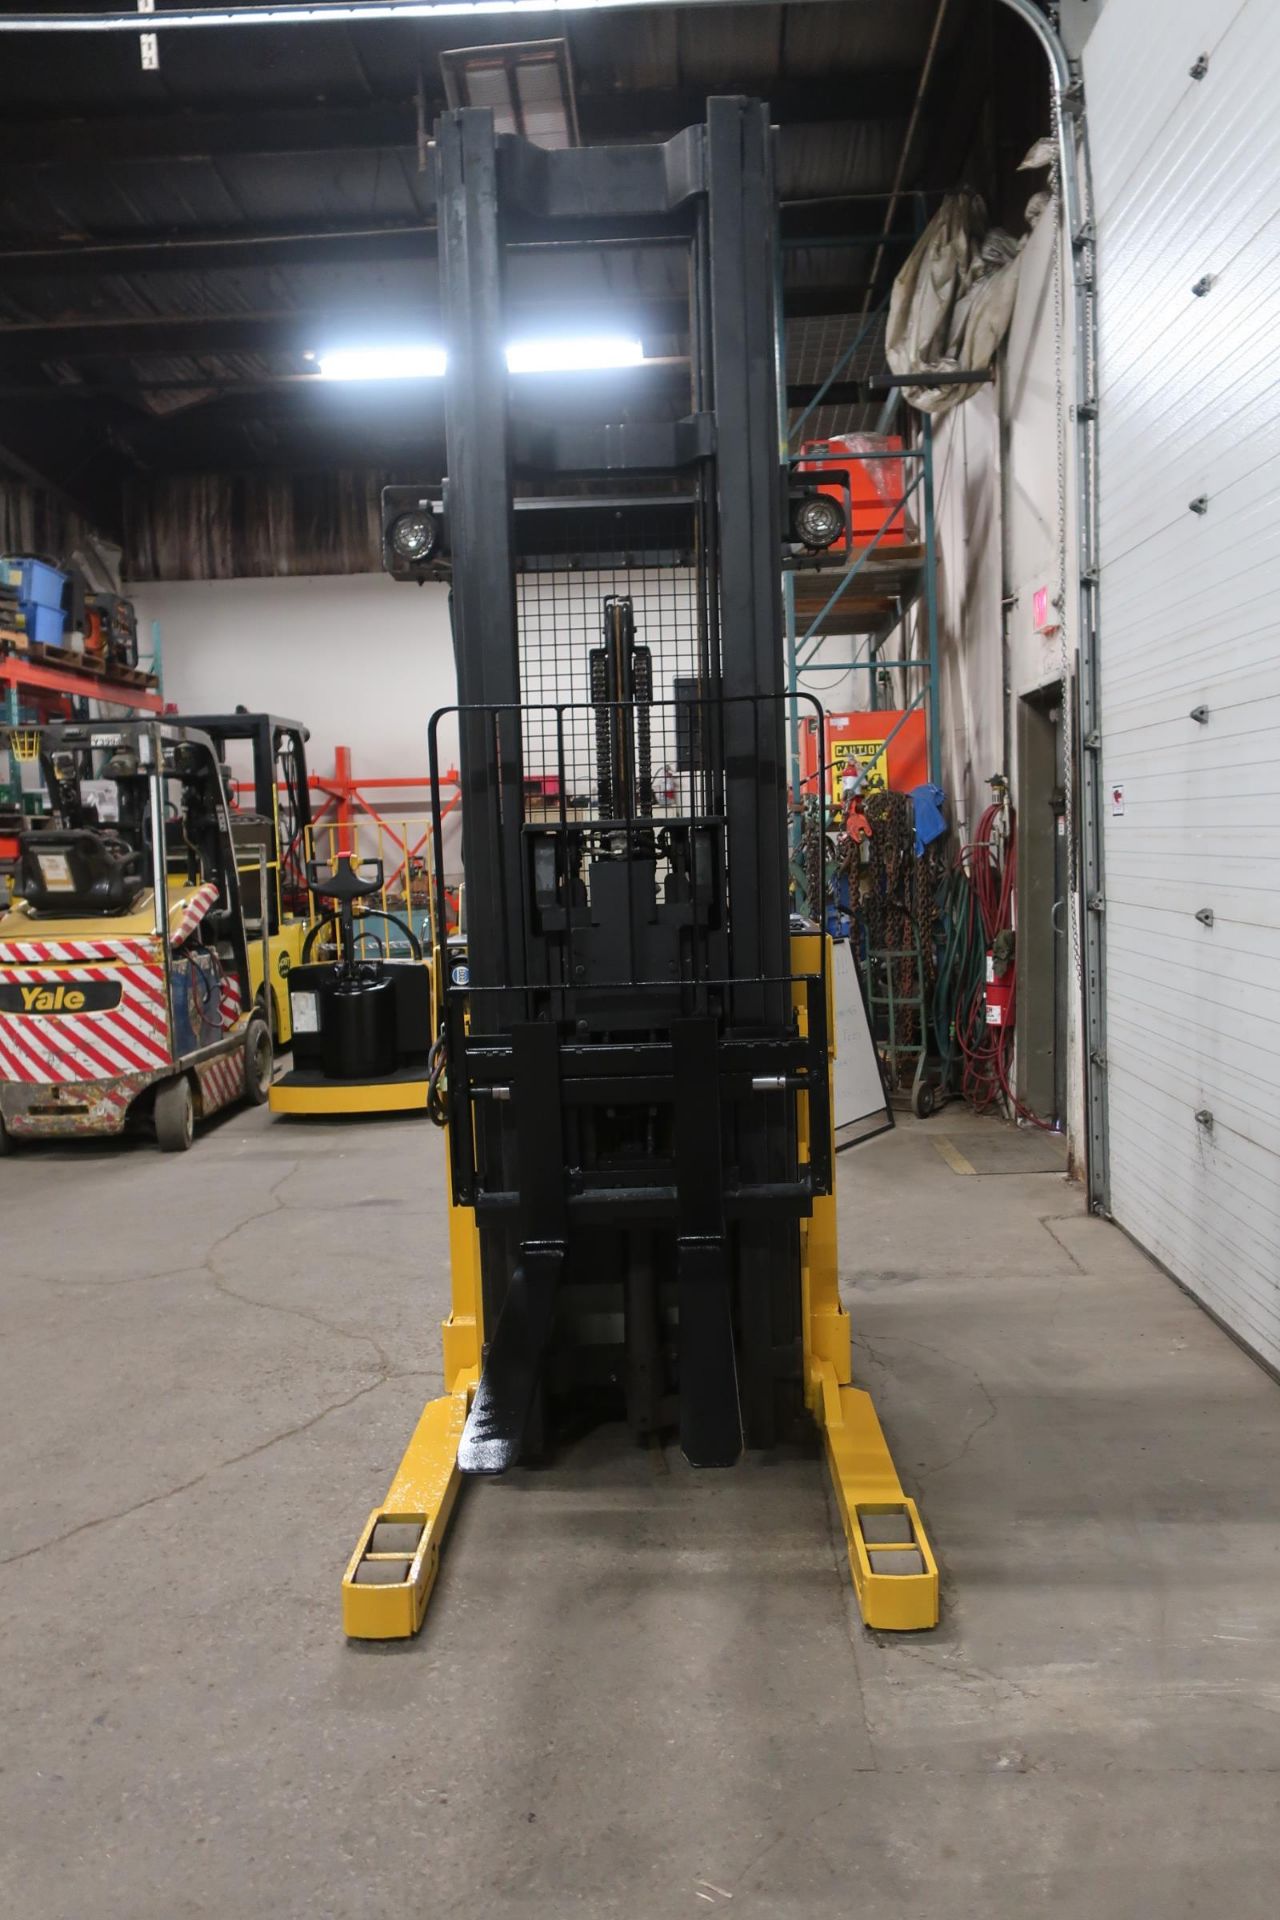 FREE CUSTOMS - 2005 Hyster Reach Truck Pallet Lifter with LOW HOURS and 3-stage electric with - Image 3 of 3